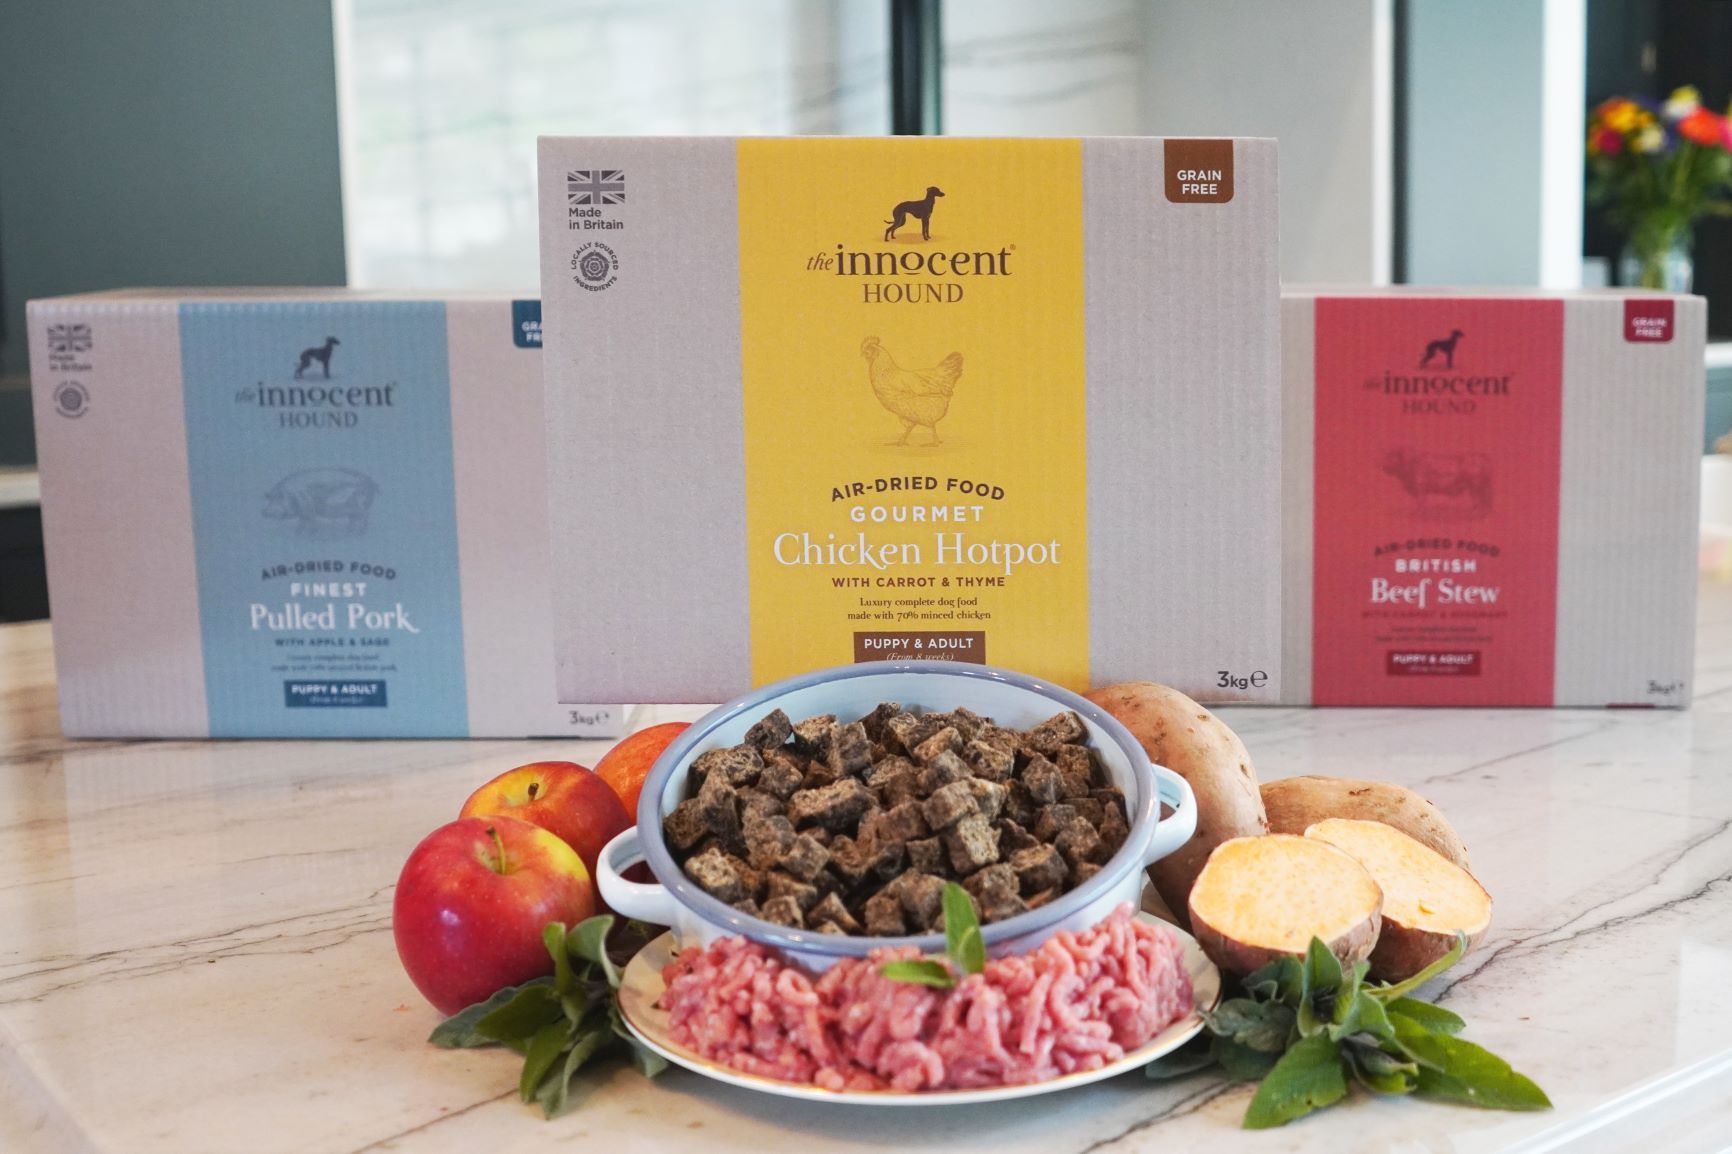 New Recipes Added To Air-Dried Dog Food Range